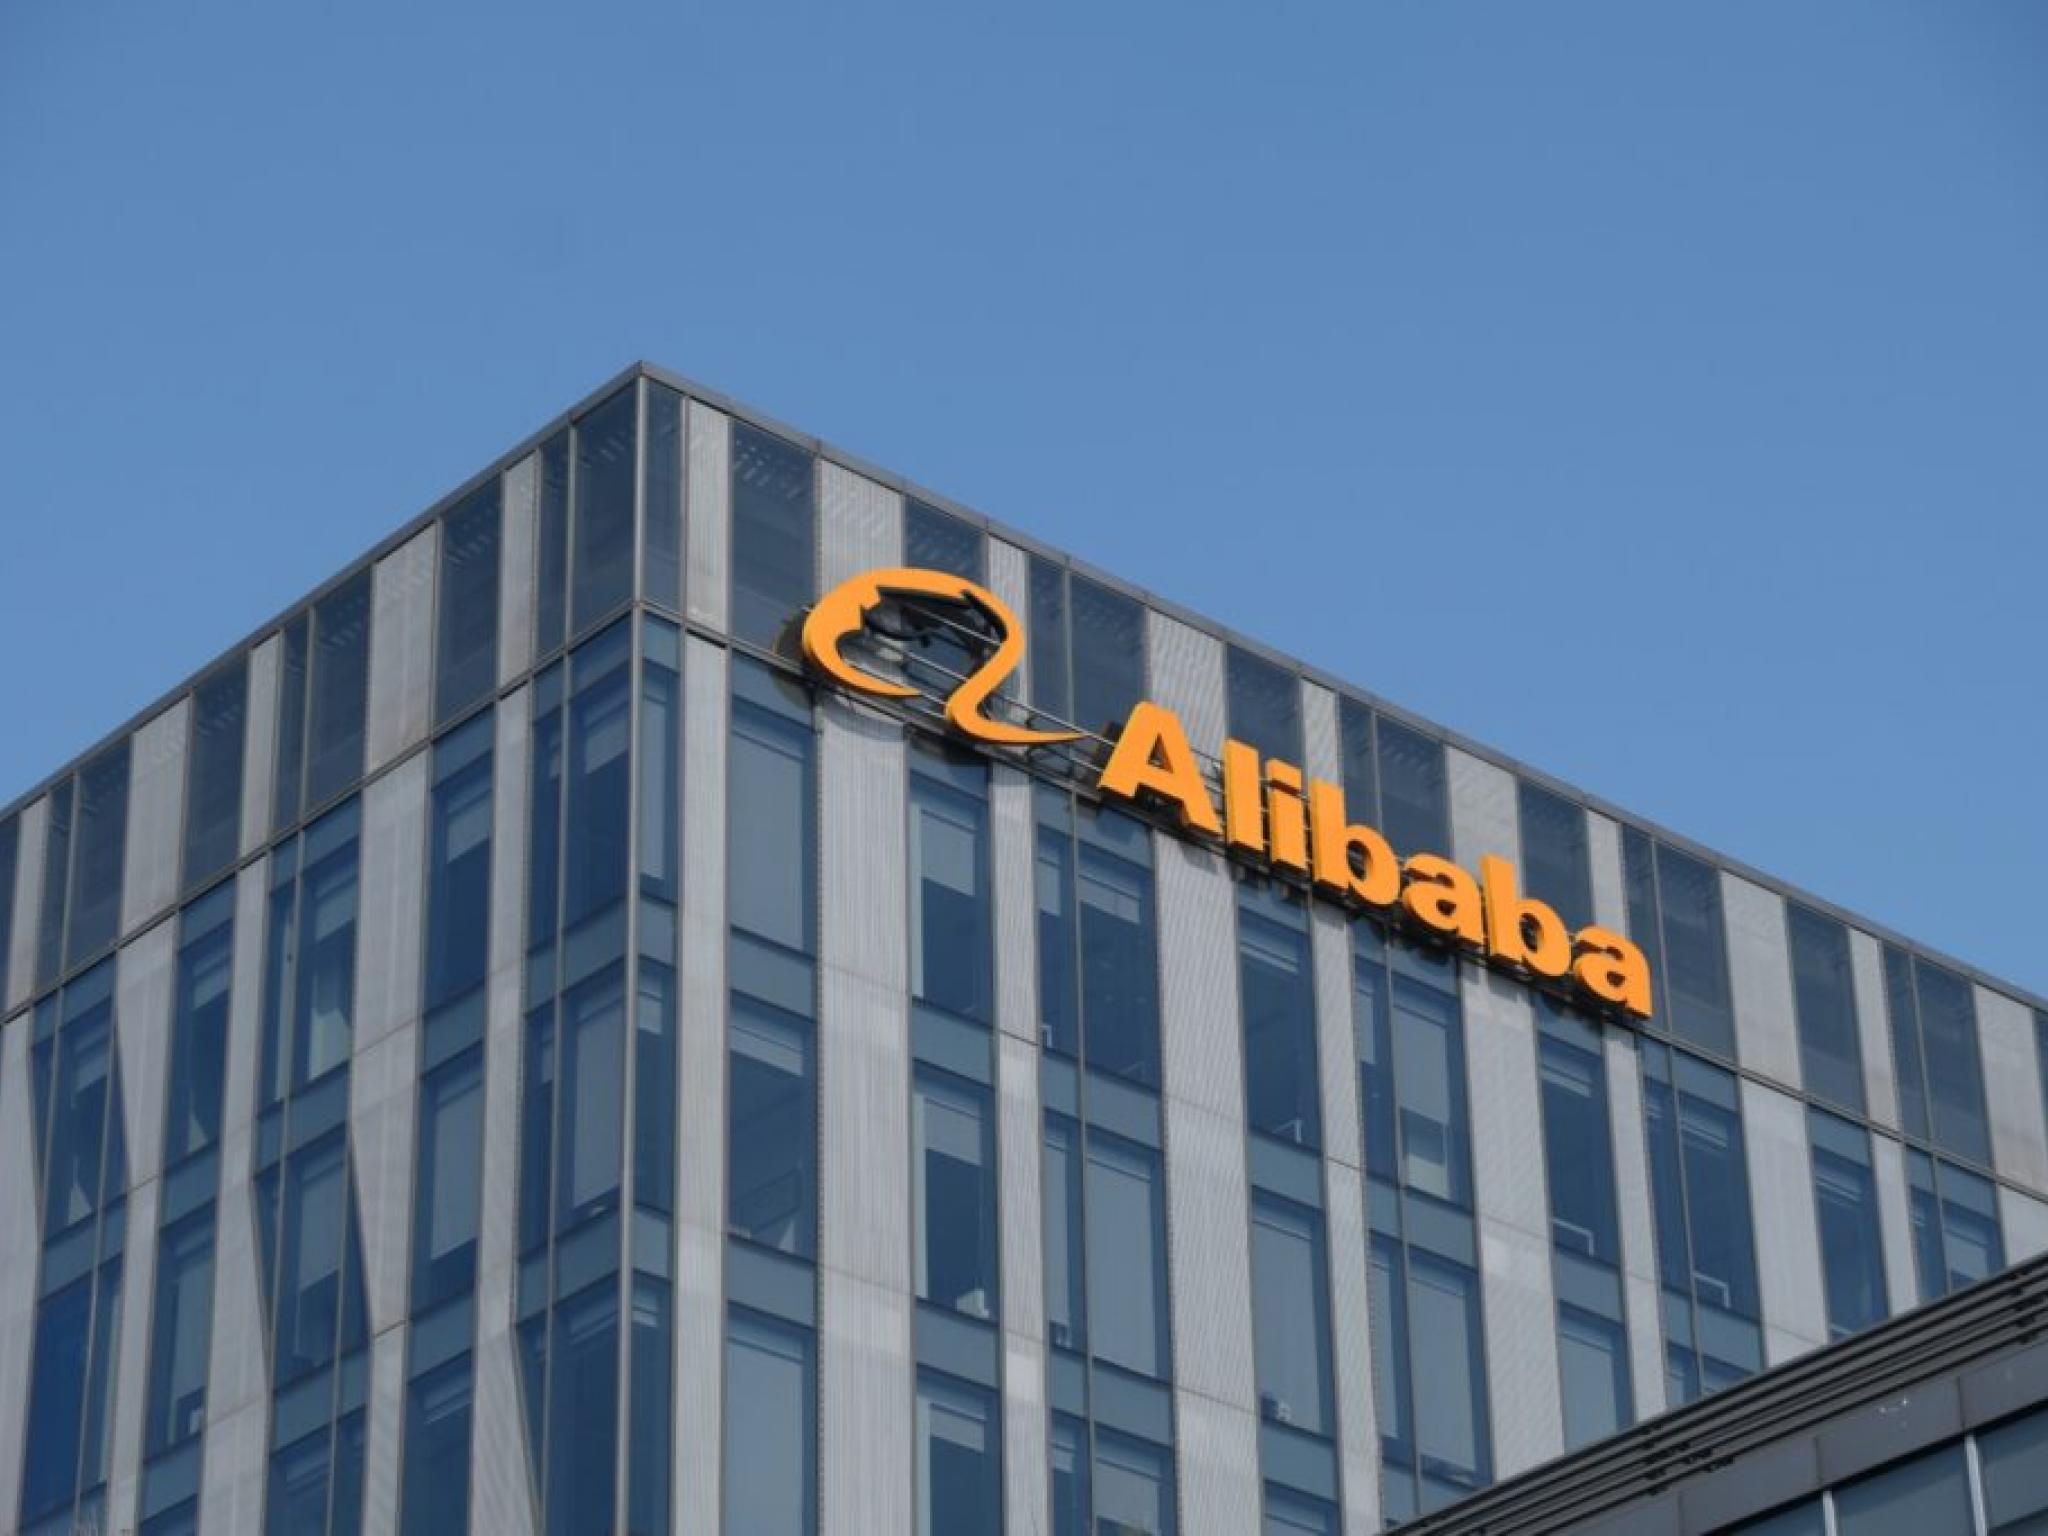  alibaba-and-coupang-intensify-e-commerce-battle-with-major-investments-in-south-korea 